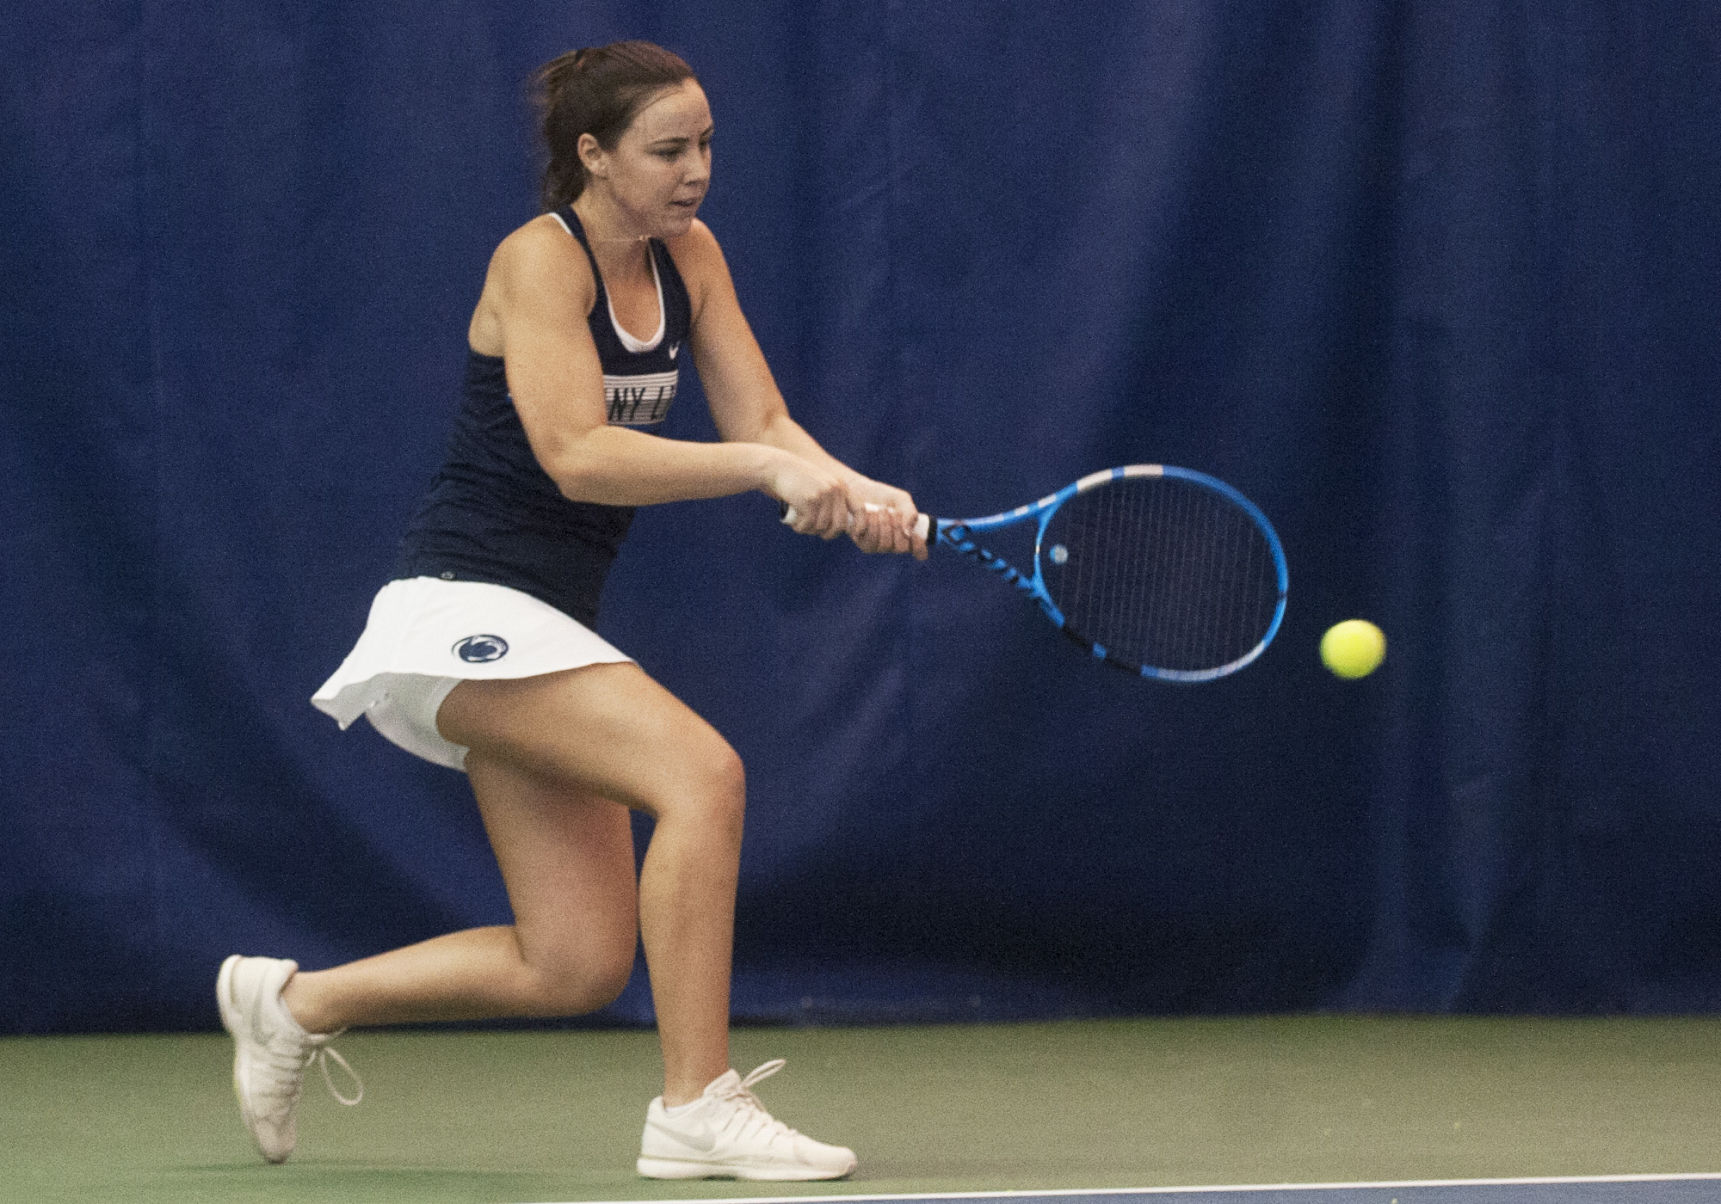 Penn State Womens Tennis wraps up first tournament of the fall Penn State Sports News psucollegian